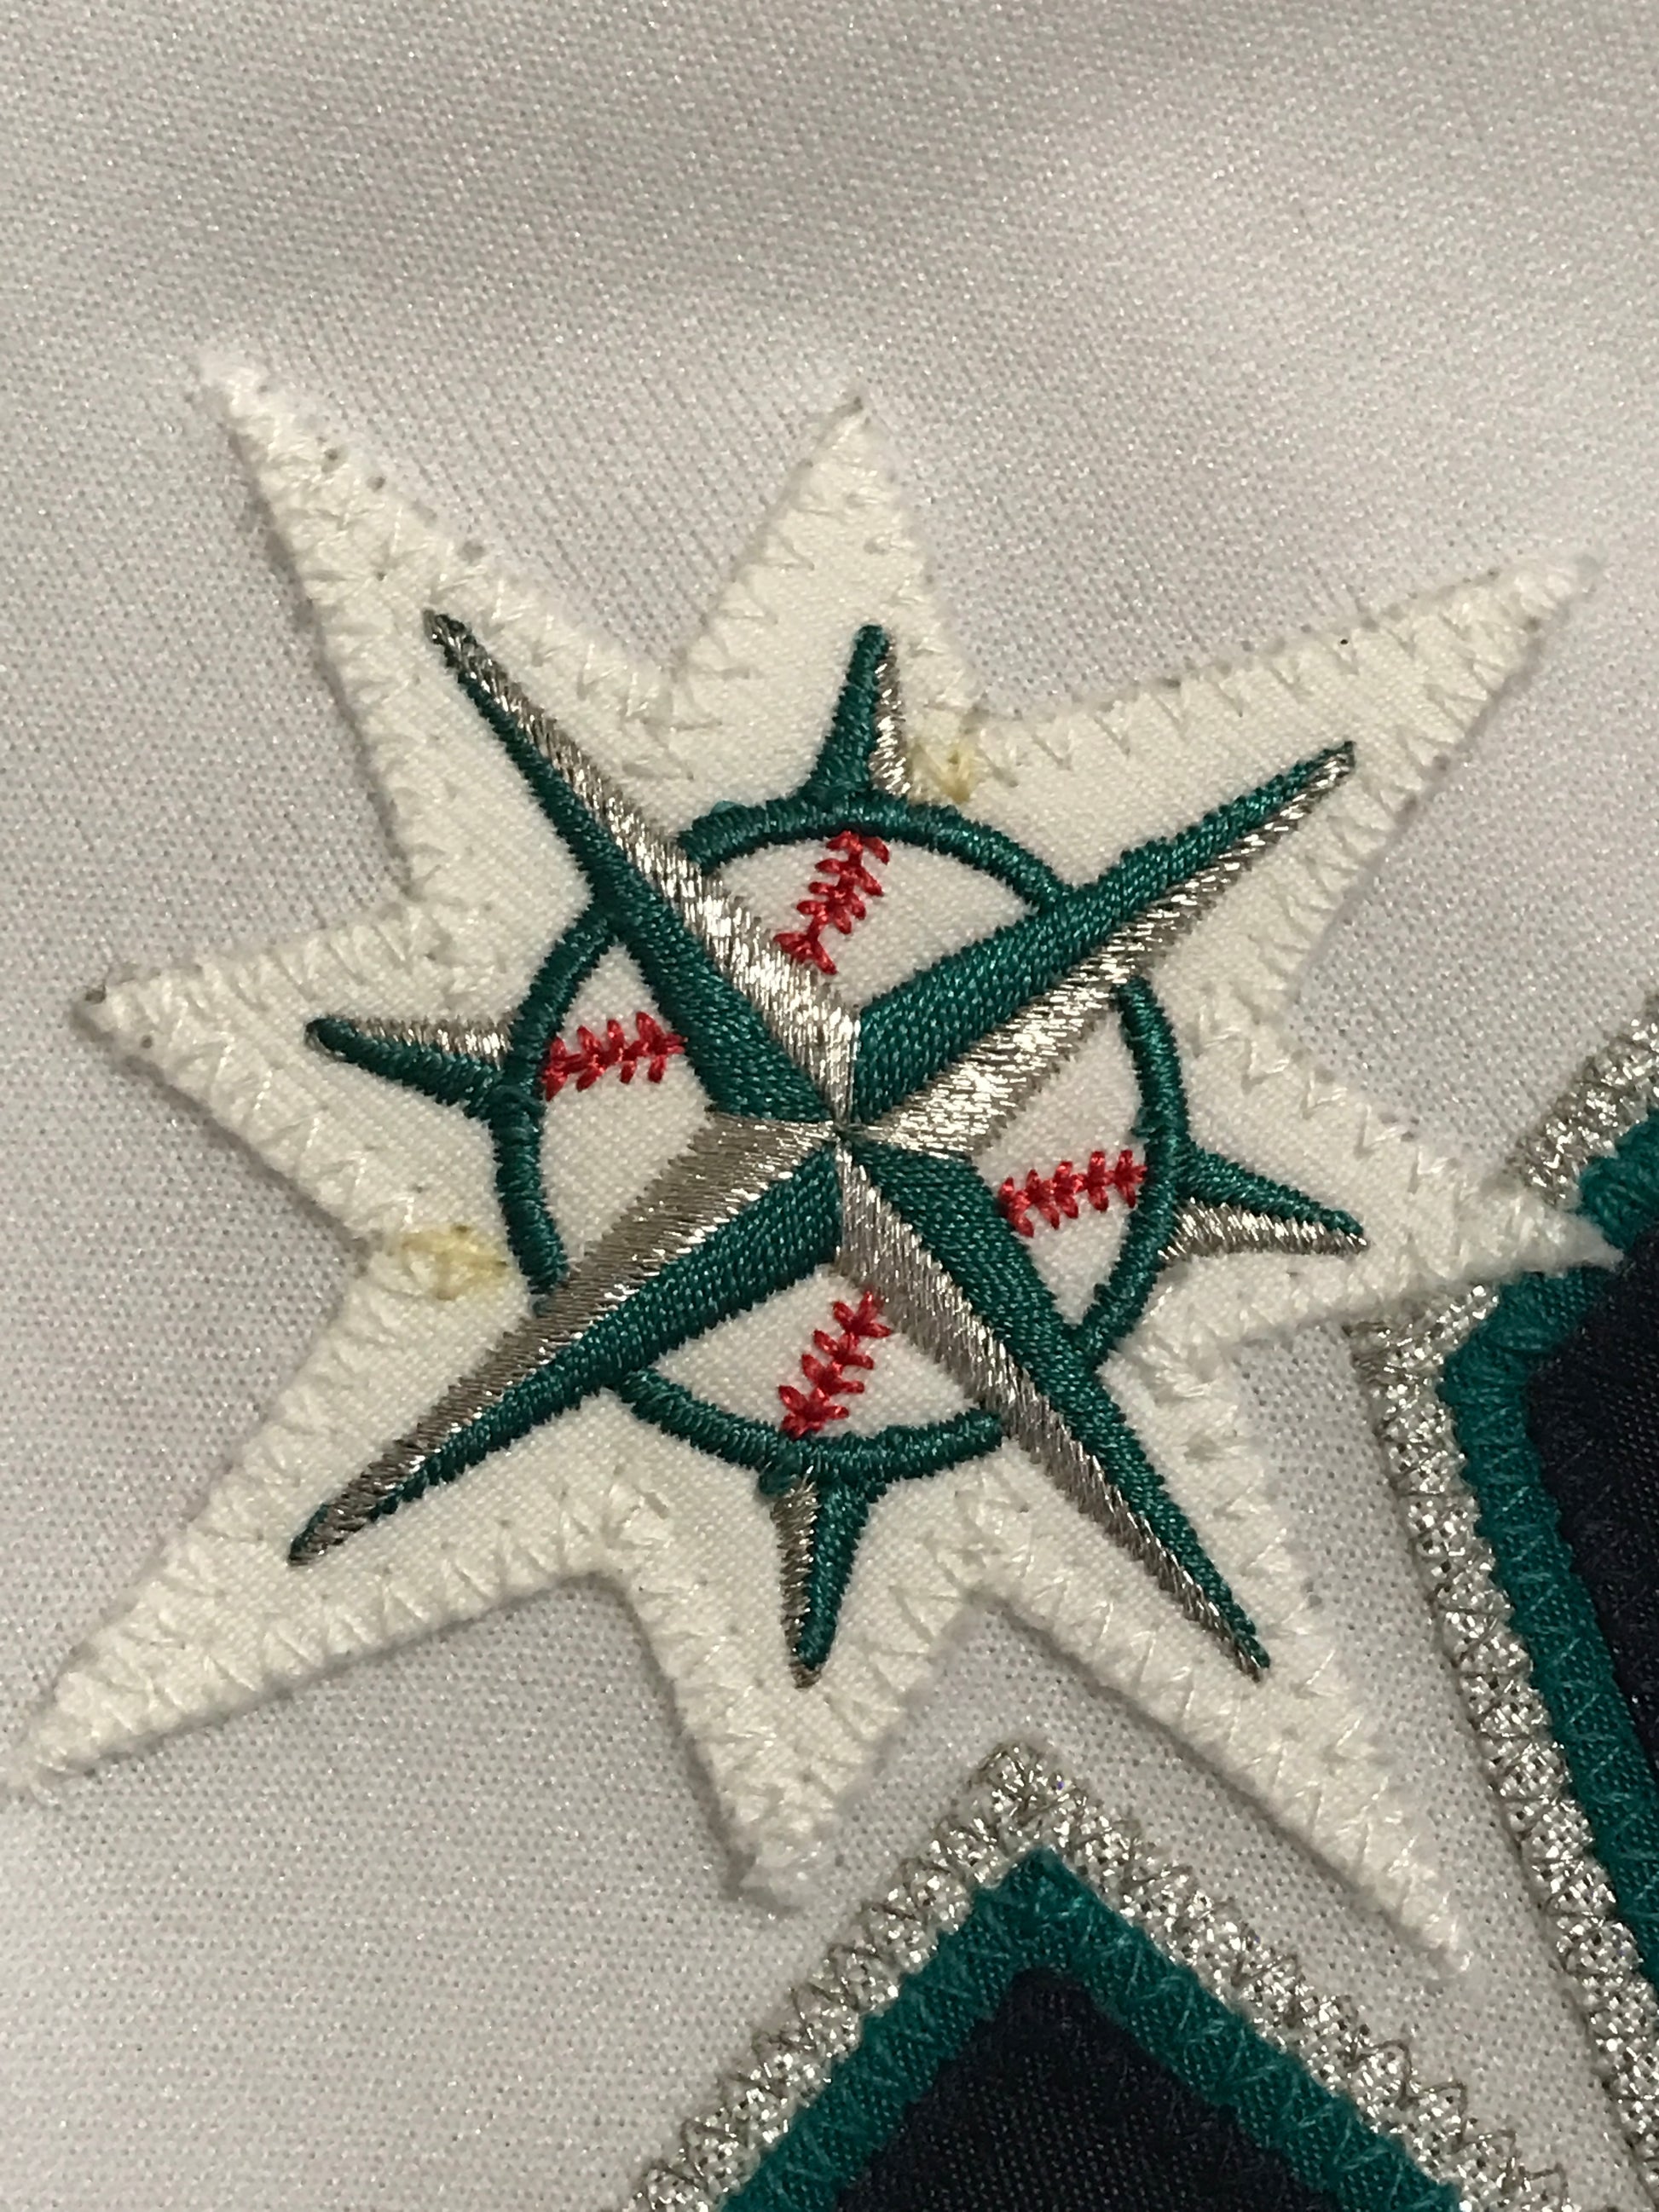 2001 MLB All Star Game Jersey Patch Seattle Mariners